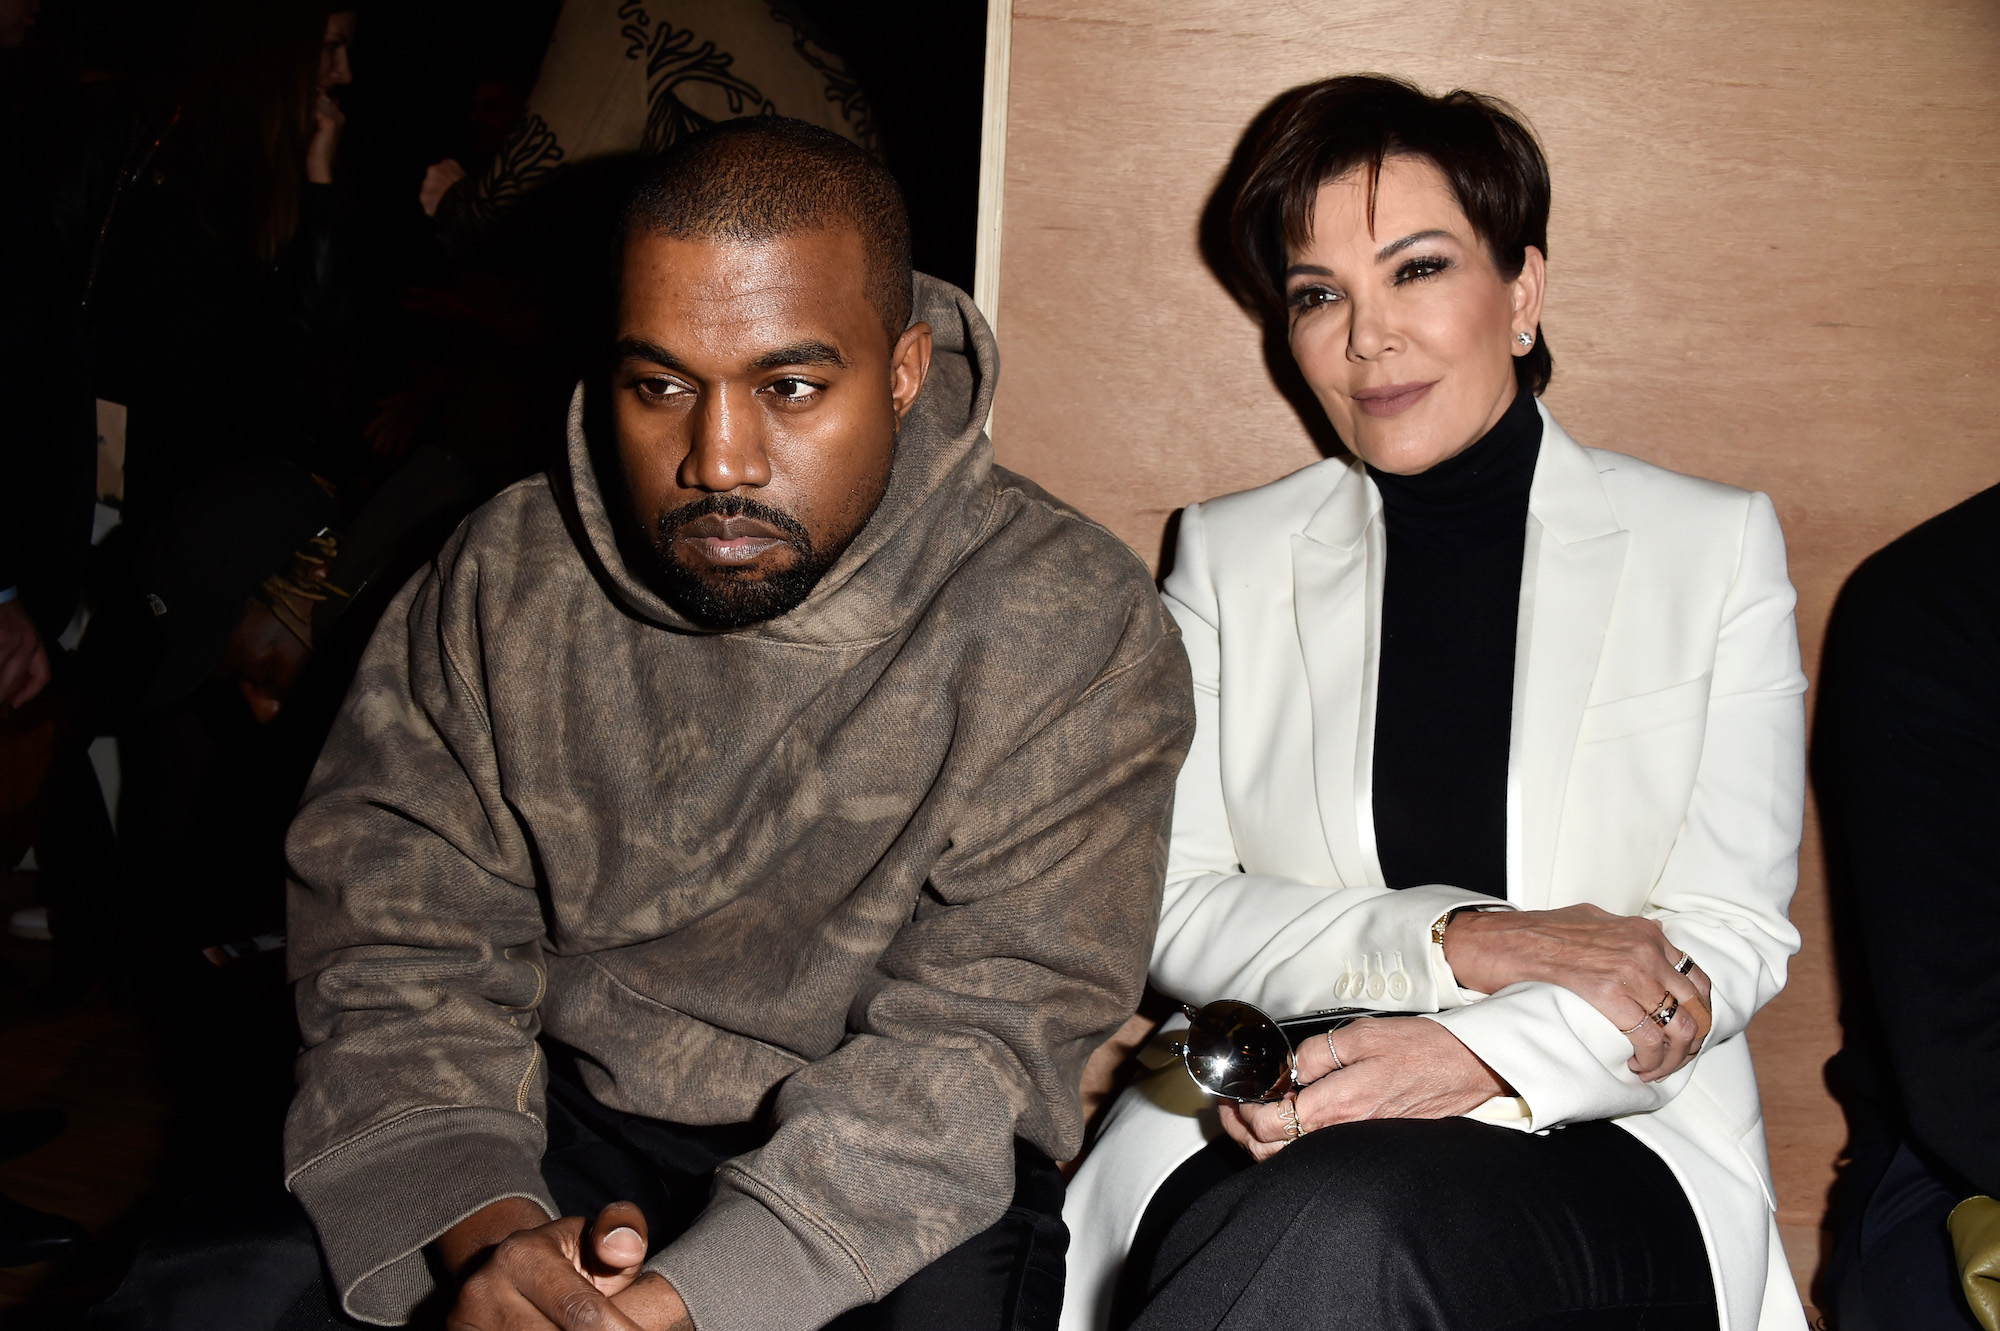 Kanye West looking off camera leaning forward next to Kris Jenner